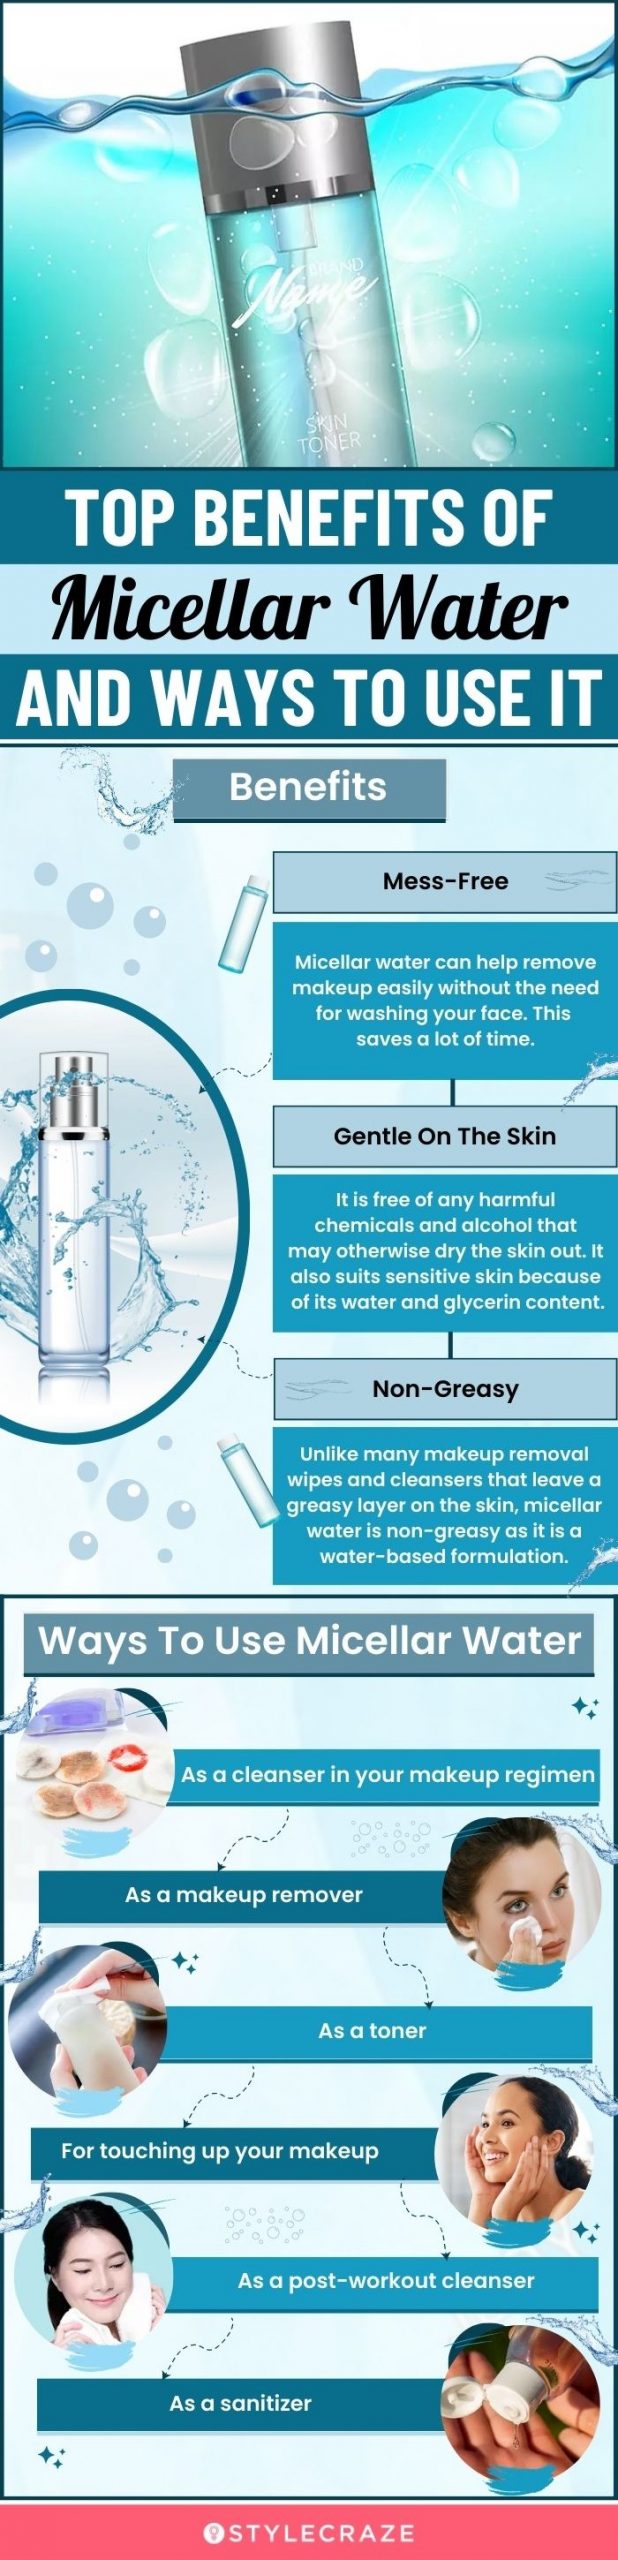 top benefits of micellar water (infographic)